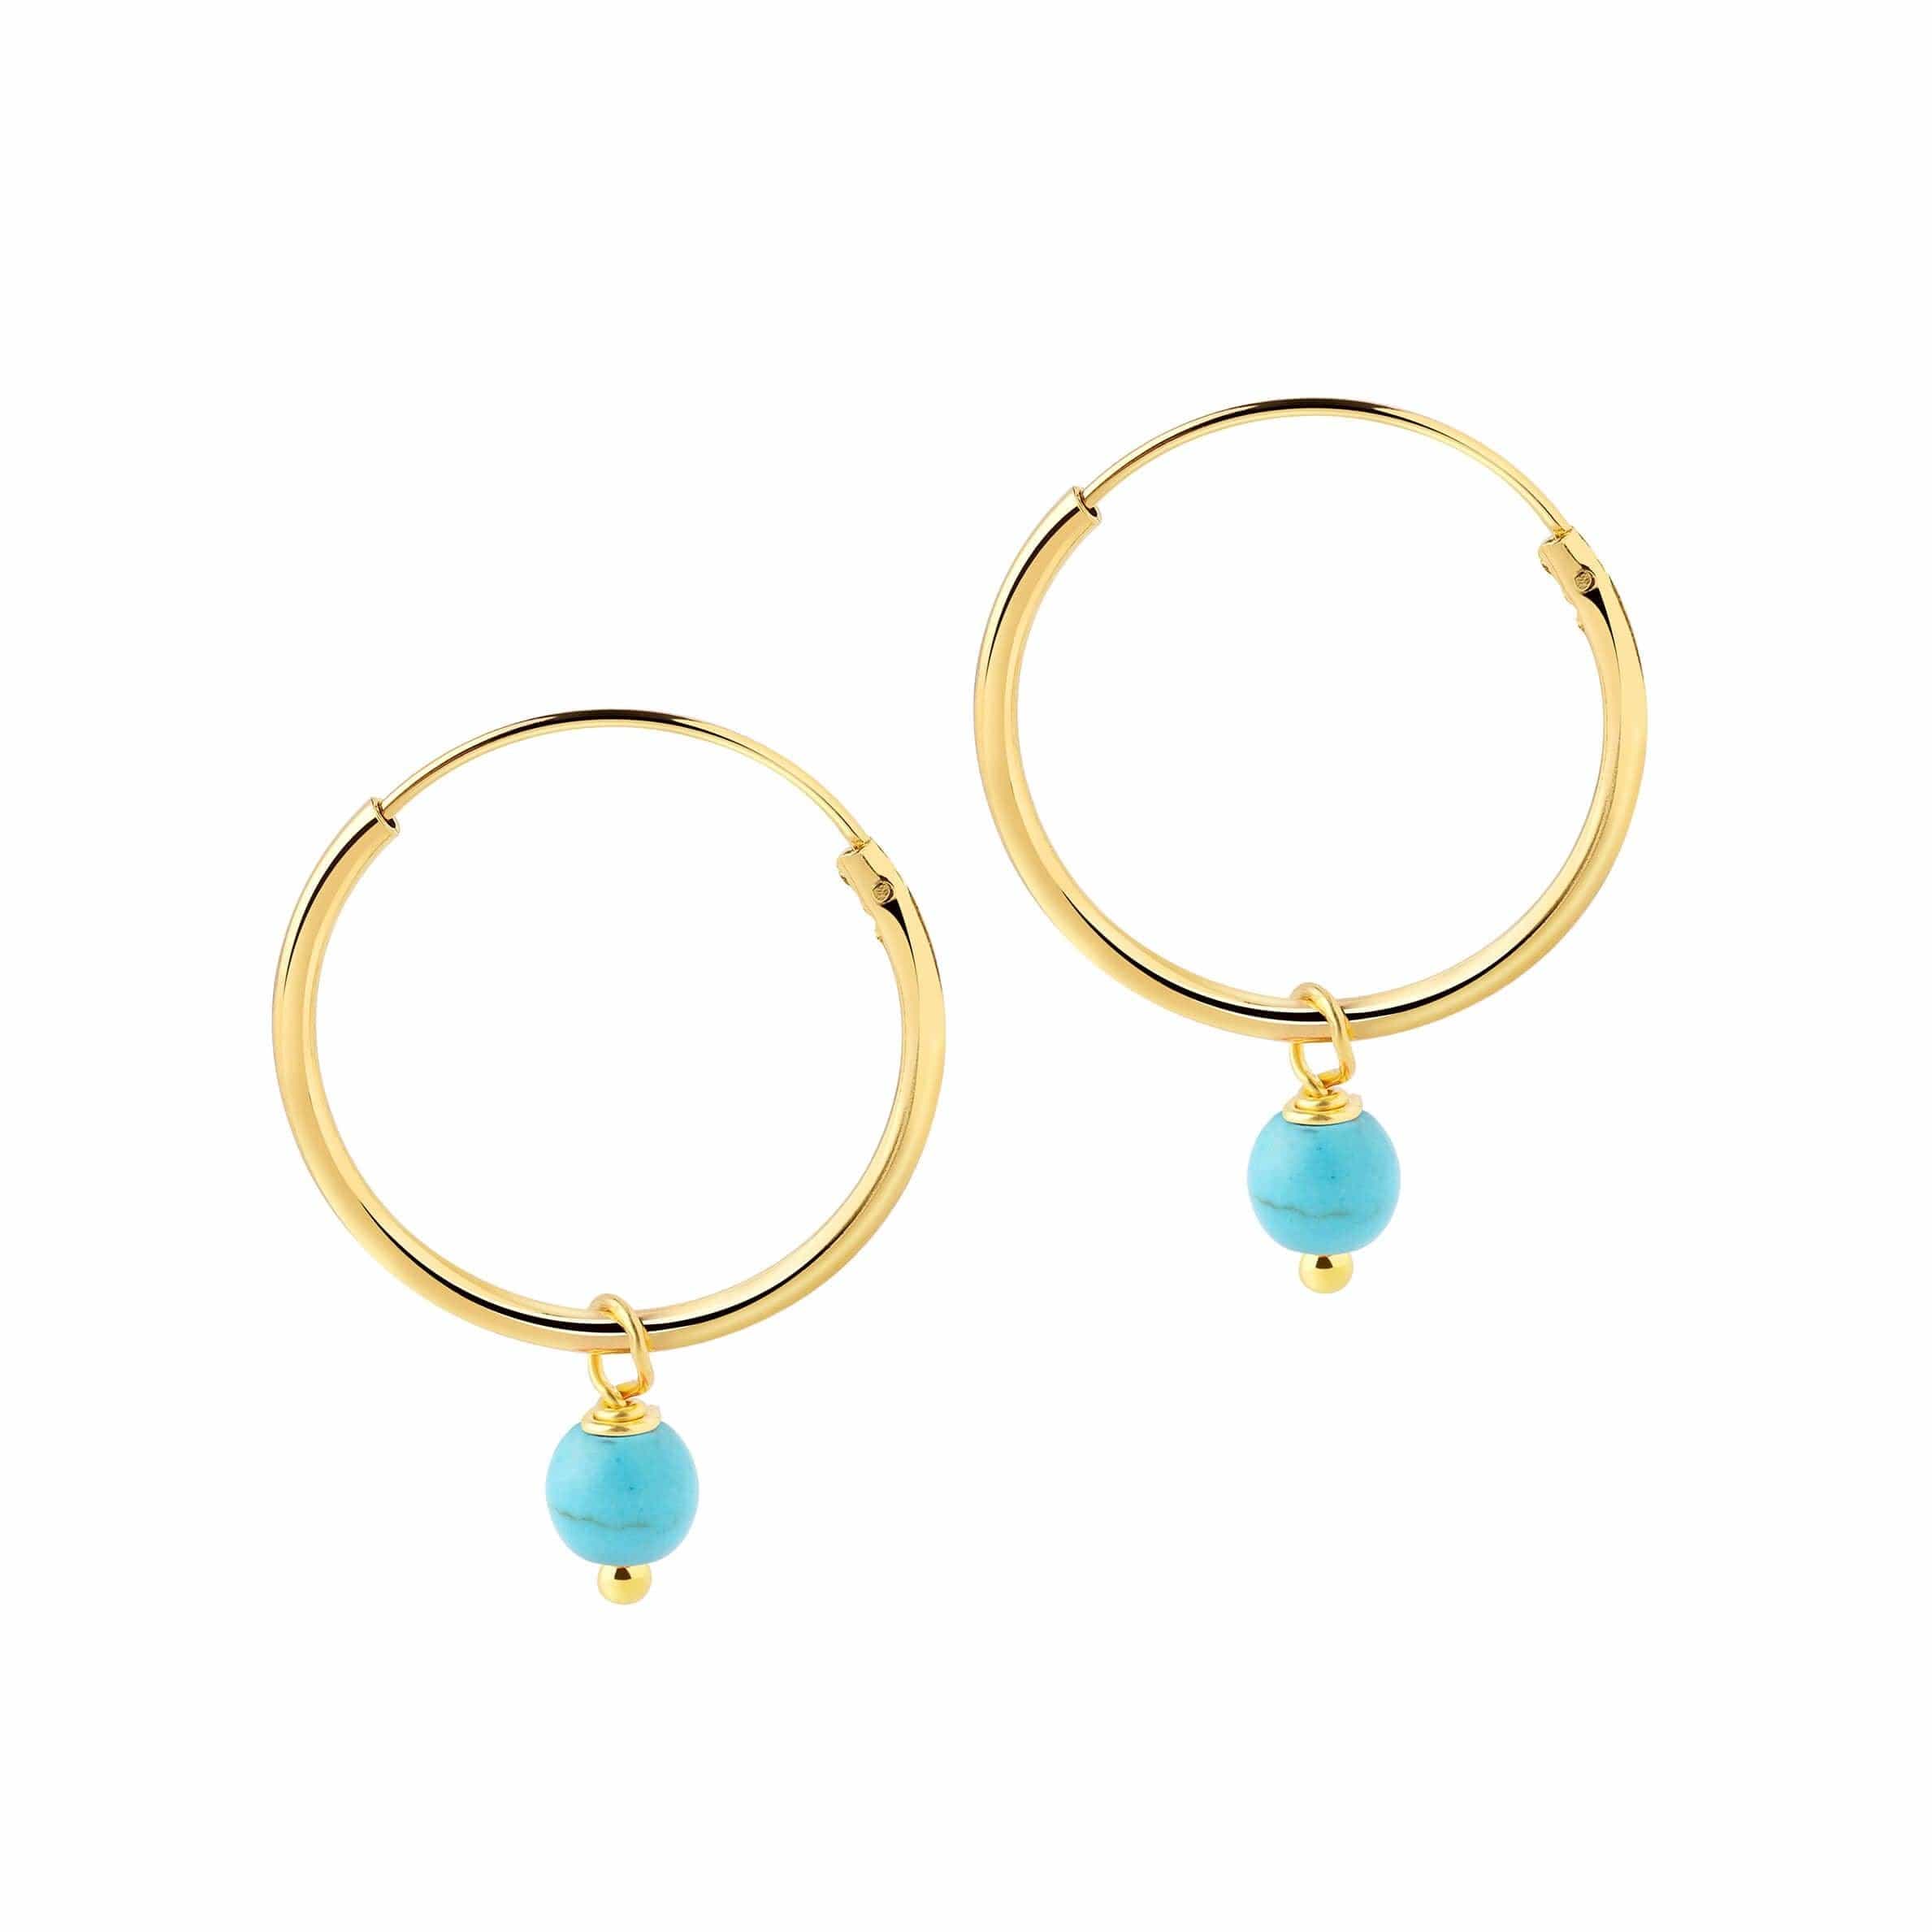 18 mm Gold plated Hoop Earrings Turquoise Blue Stone